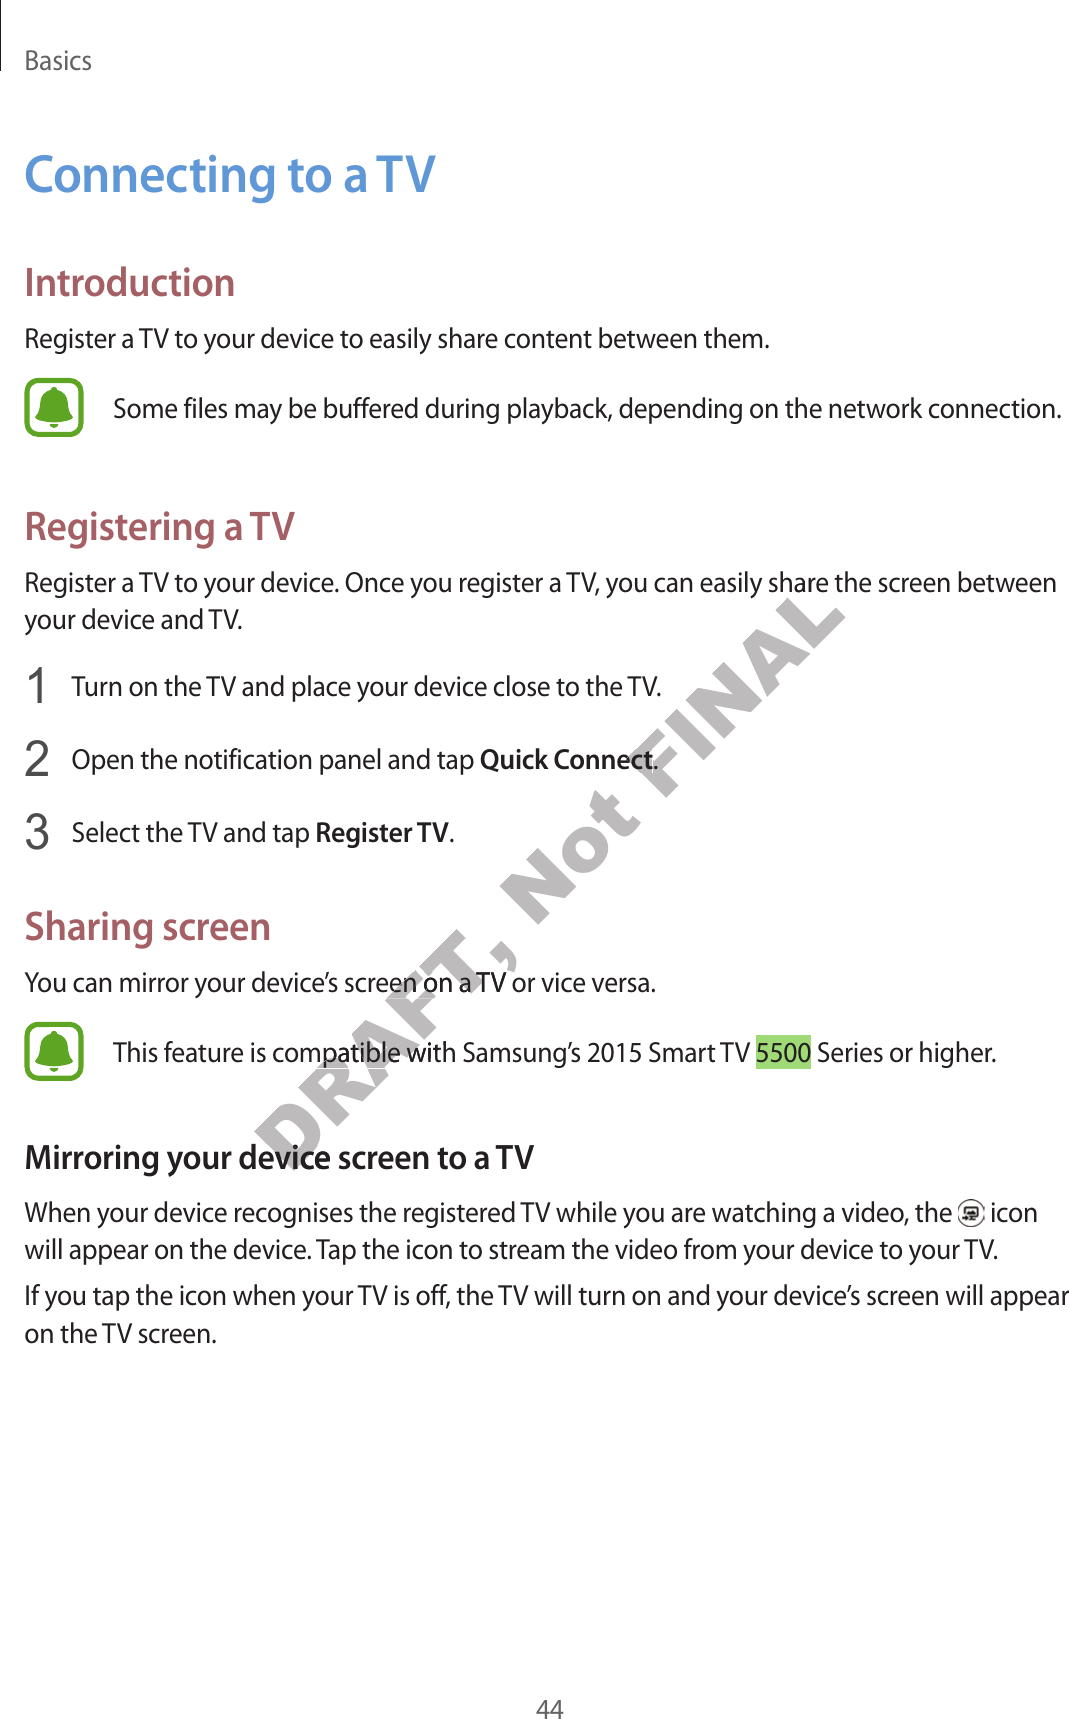 Basics44Connecting to a TVIntroductionRegister a TV to your device to easily share content between them.Some files may be buffered during playback, depending on the network connection.Registering a TVRegister a TV to your device. Once you register a TV, you can easily share the screen between your device and TV.1  Turn on the TV and place your device close to the TV.2  Open the notification panel and tap Quick Connect.3  Select the TV and tap Register TV.Sharing screenYou can mirror your device’s screen on a TV or vice versa.This feature is compatible with Samsung’s 2015 Smart TV 5500 Series or higher.Mirroring your device screen to a TVWhen your device recognises the registered TV while you are watching a video, the   icon will appear on the device. Tap the icon to stream the video from your device to your TV.If you tap the icon when your TV is off, the TV will turn on and your device’s screen will appear on the TV screen.DRAFT, s screen on a TV or vics screen on a TV or vicDRAFT, ompatible with Sompatible with Sour device scrour device scrNot FINALou can easily share the scrou can easily sharonnectonnect..